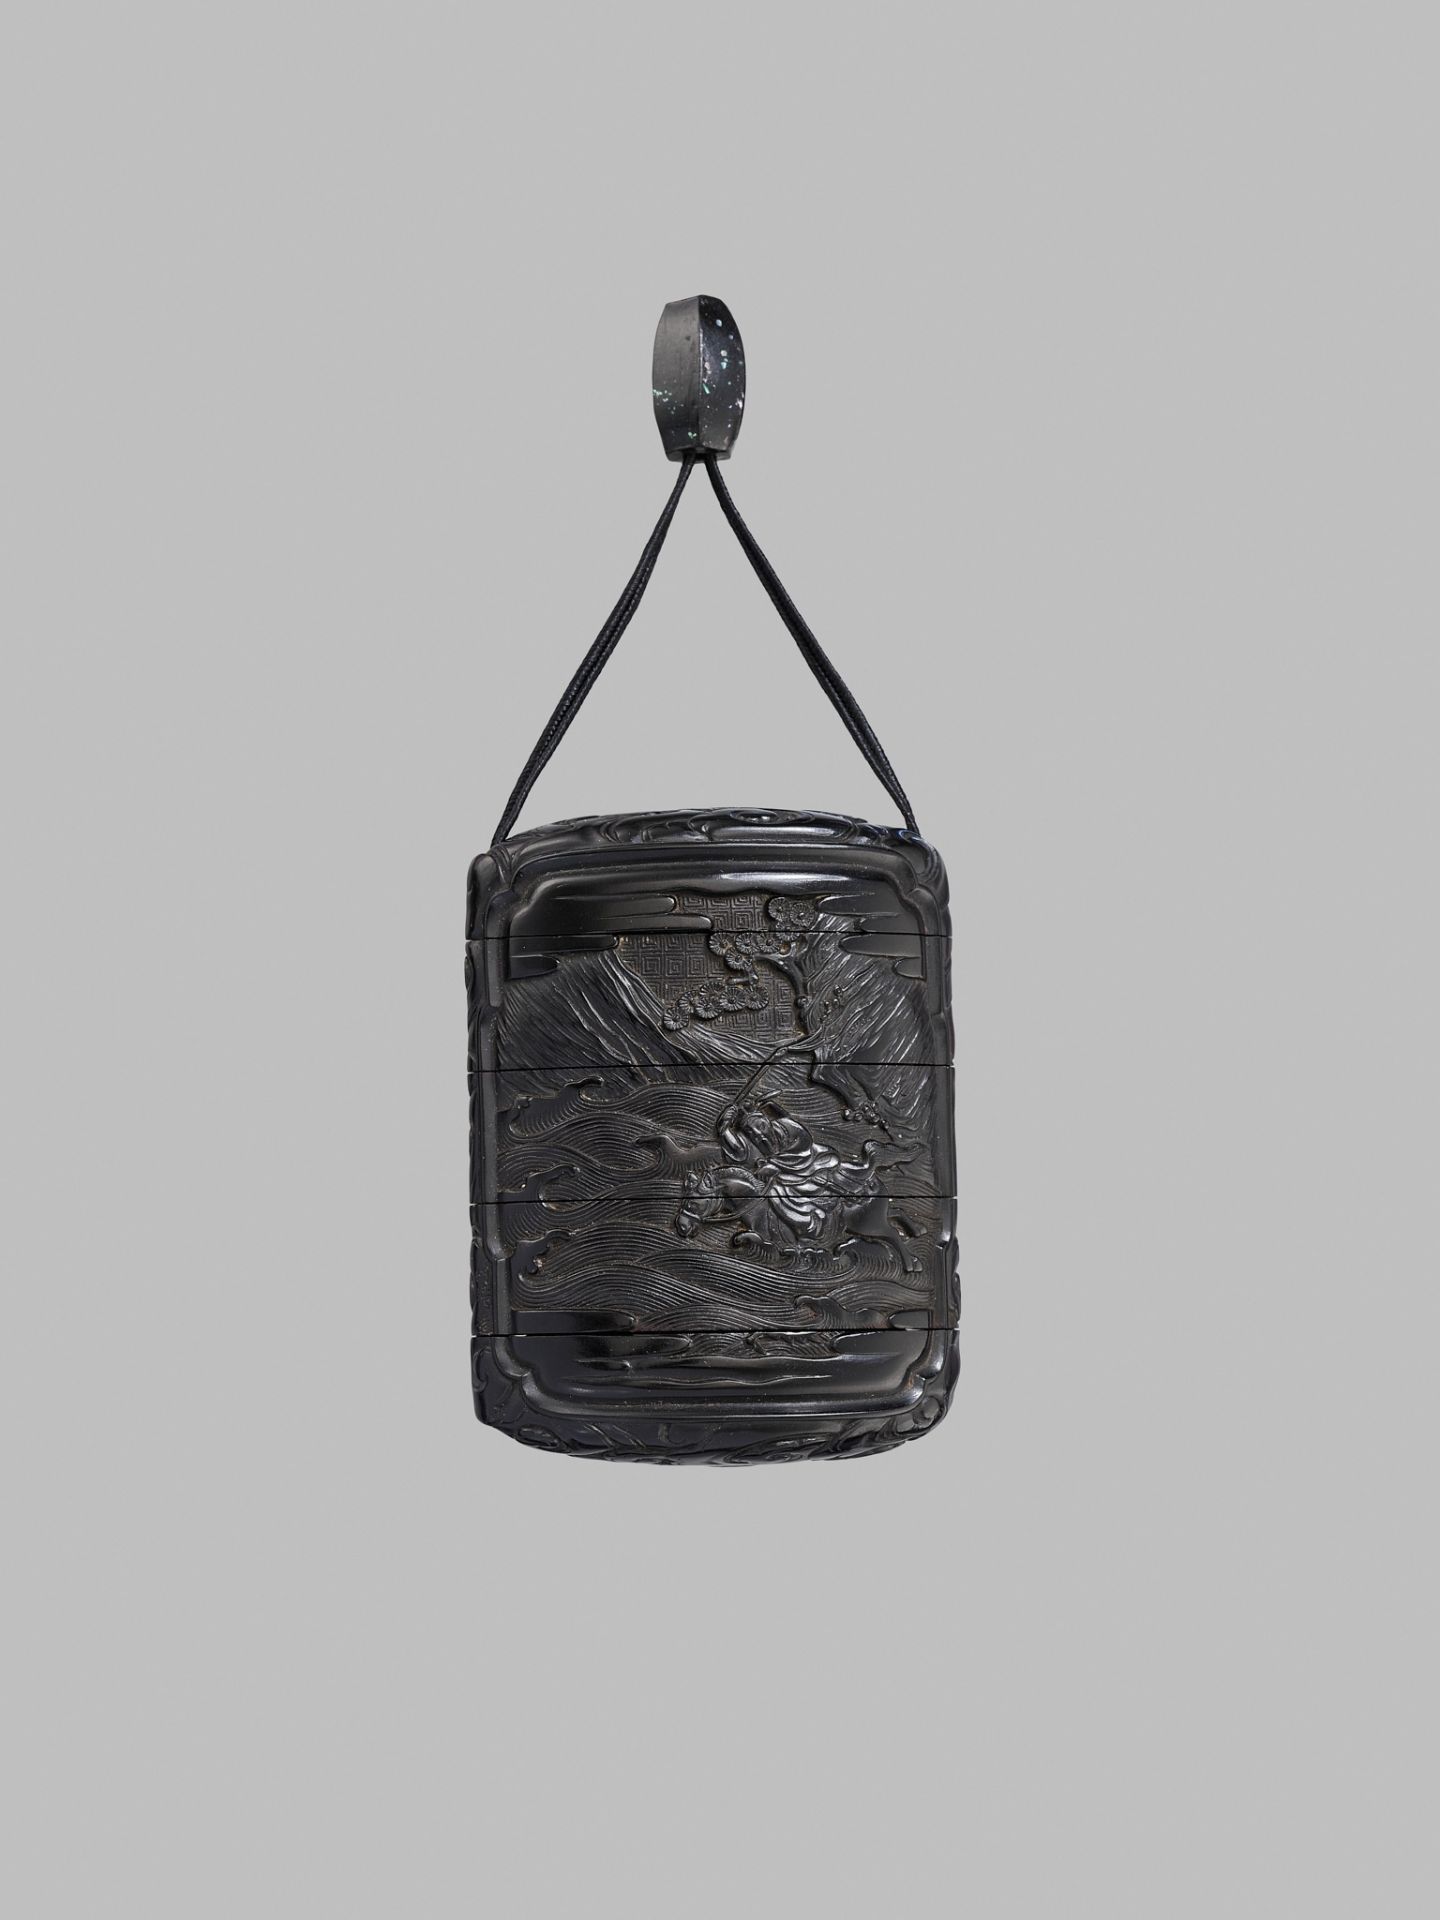 ZONSEI: A FINE TSUIKOKU (CARVED BLACK LACQUER) FOUR-CASE INRO DEPICTING CHORYO AND KOSEKIKO - Image 5 of 7